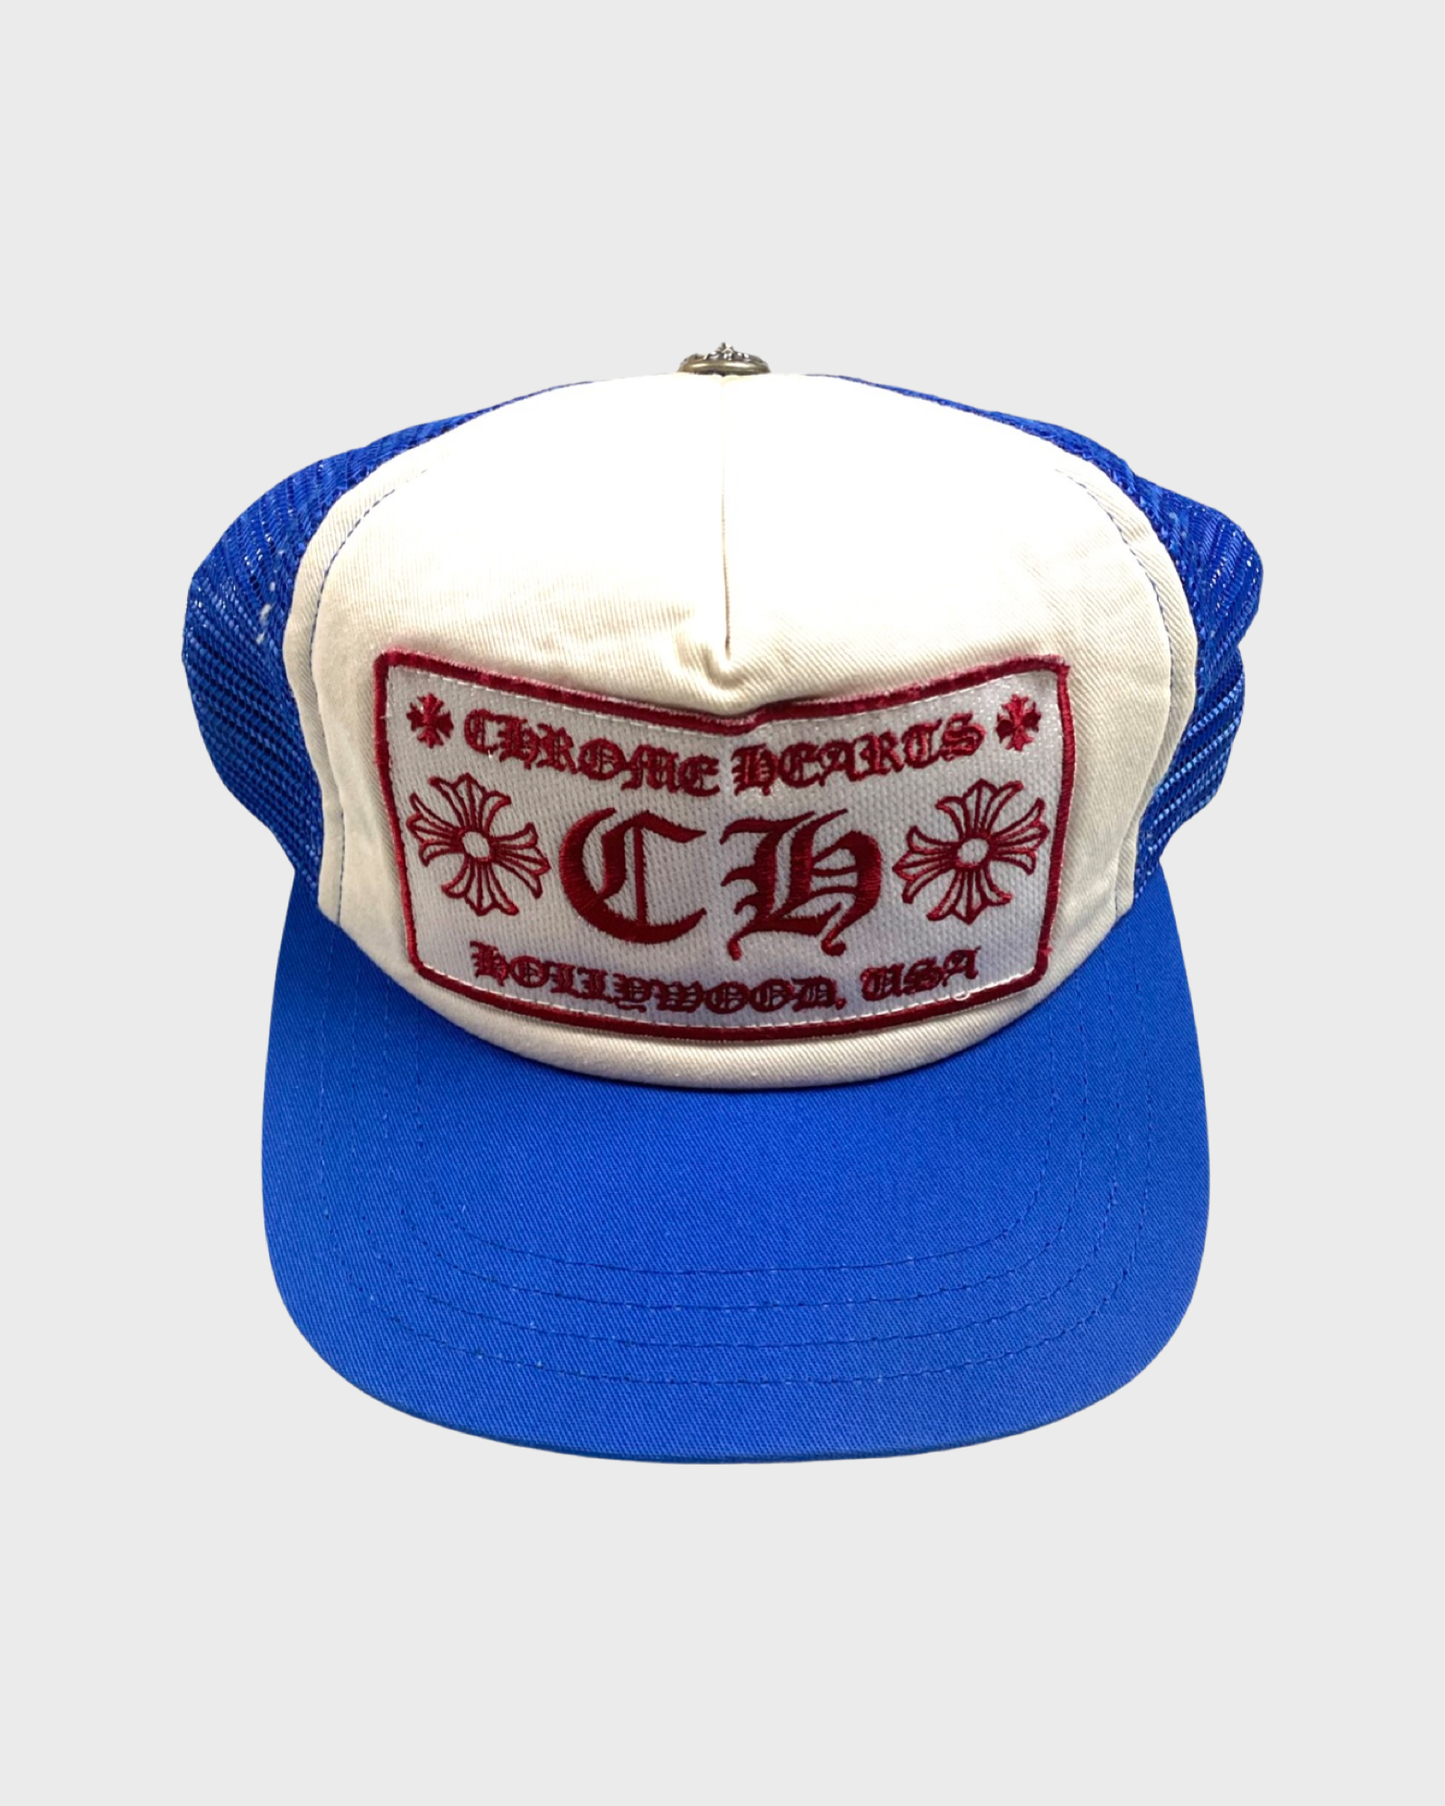 Chrome Hearts RARE blue and red trucker hat / cap SZ:OS